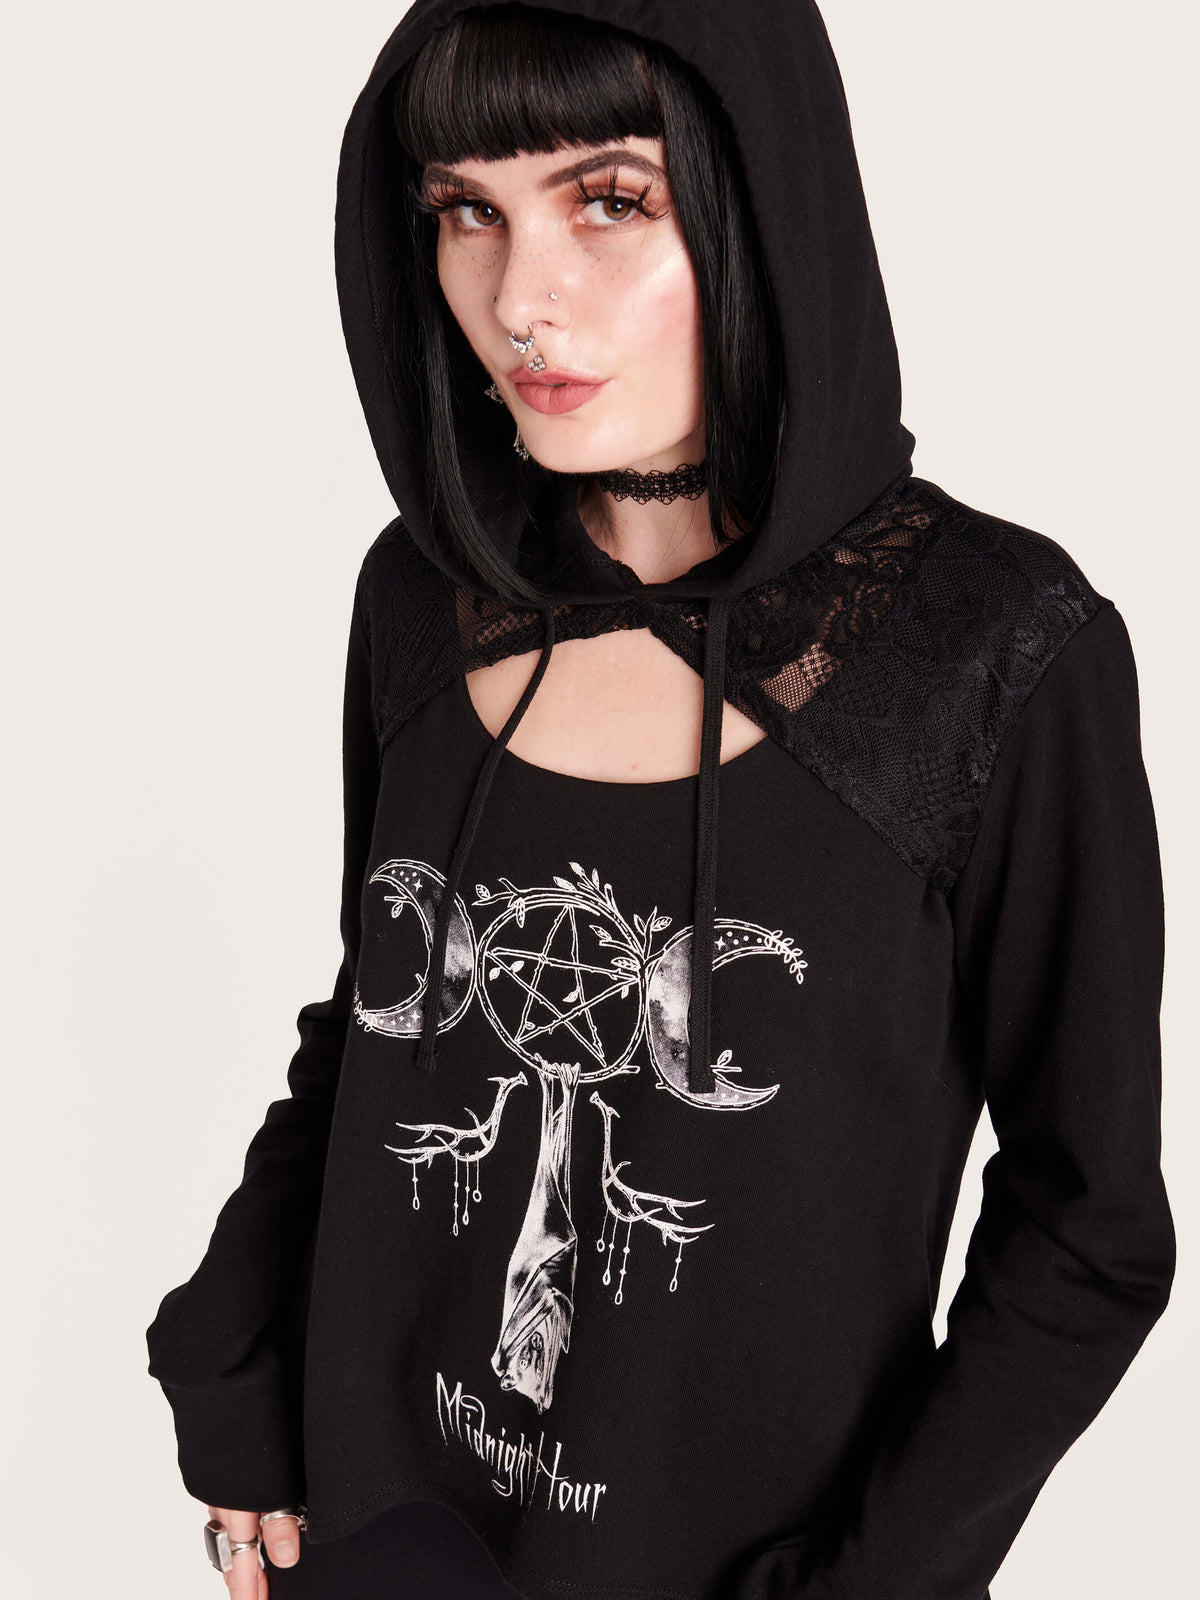 Be the hush of the night with this assymetrical hem, lace keyhole hoodie. Featuring our moon goddess sleeping bat graphic with black lace details. 100% cotton hoodie with nylon spandex lace details. witchy vibes, forest goth, bat, moon phase, crescent noon, pentacle, black lace, hoodie, nugoth, black goth, goth girl, bat girl. dark aesthetic, alt fashion.